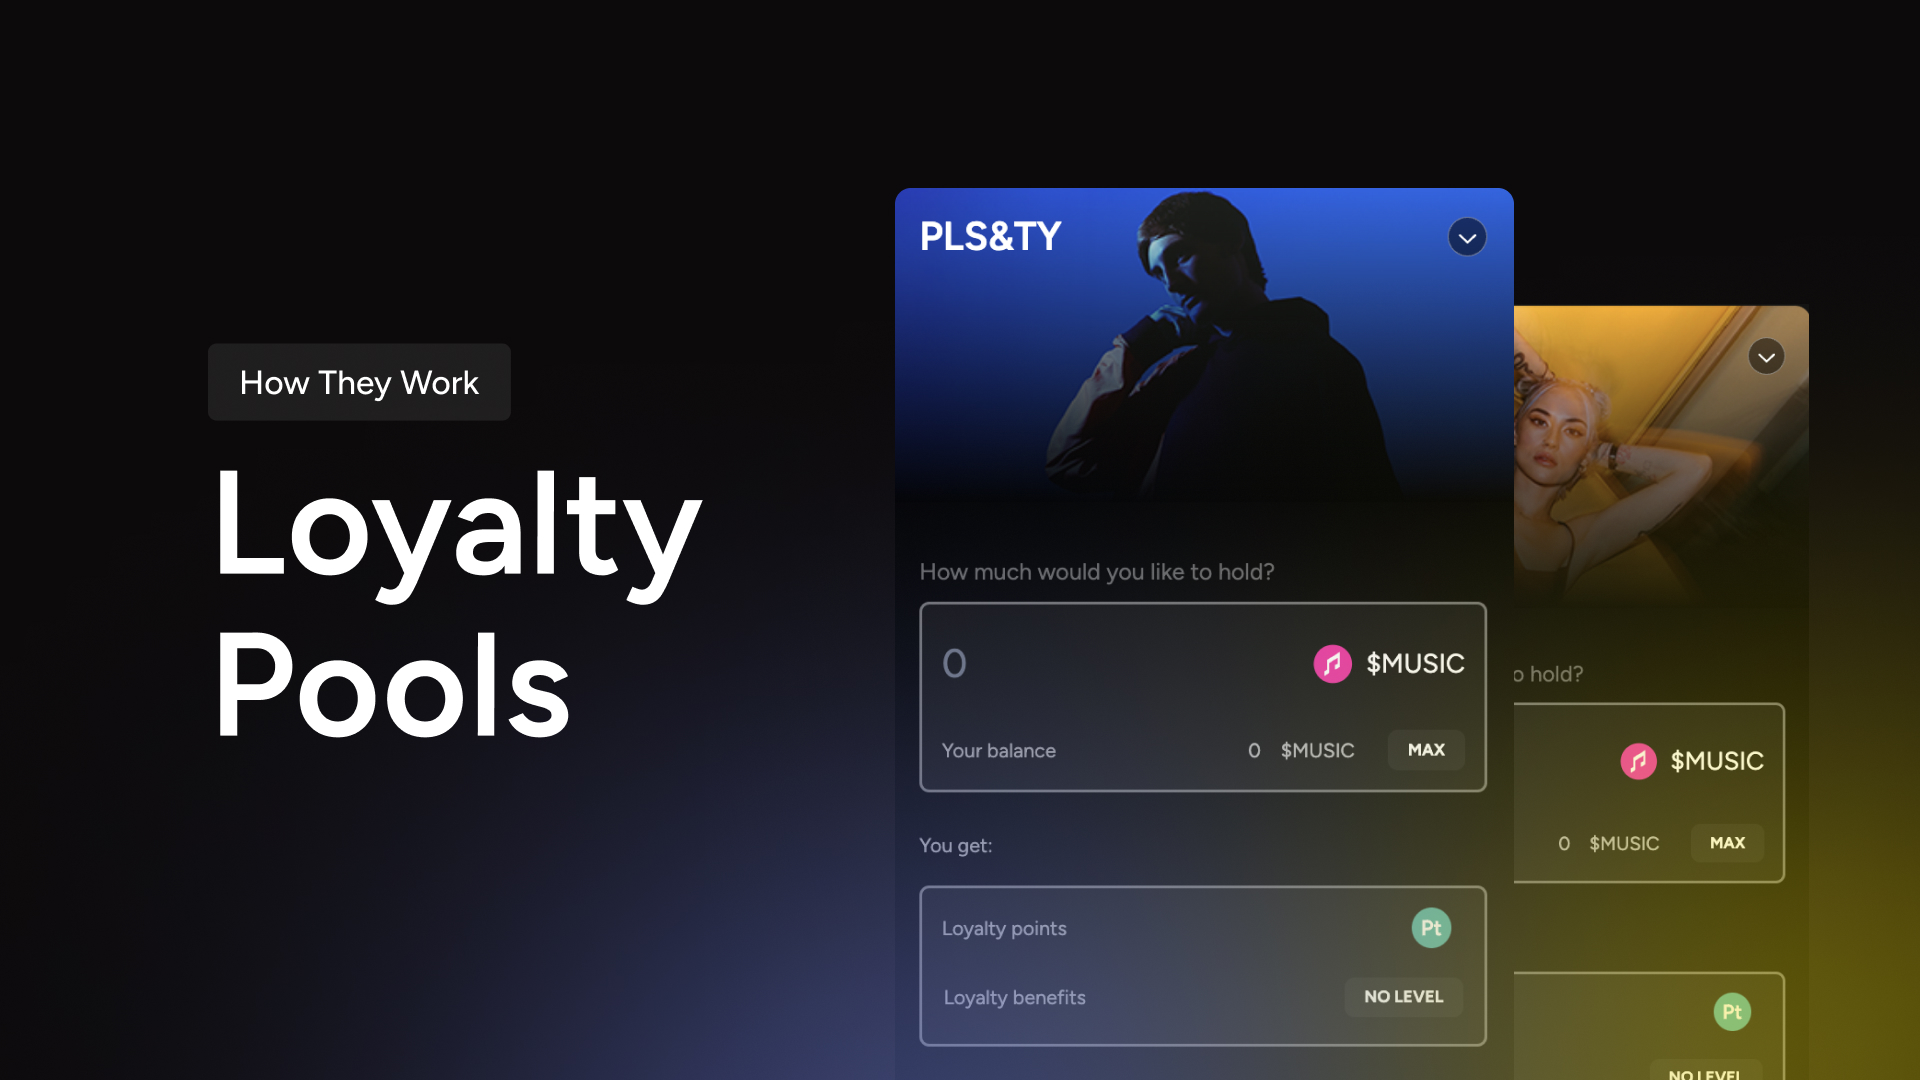 Gala Music Loyalty Pools let you hold $MUSIC in support of your favorite artists to unlock levels of benefits.